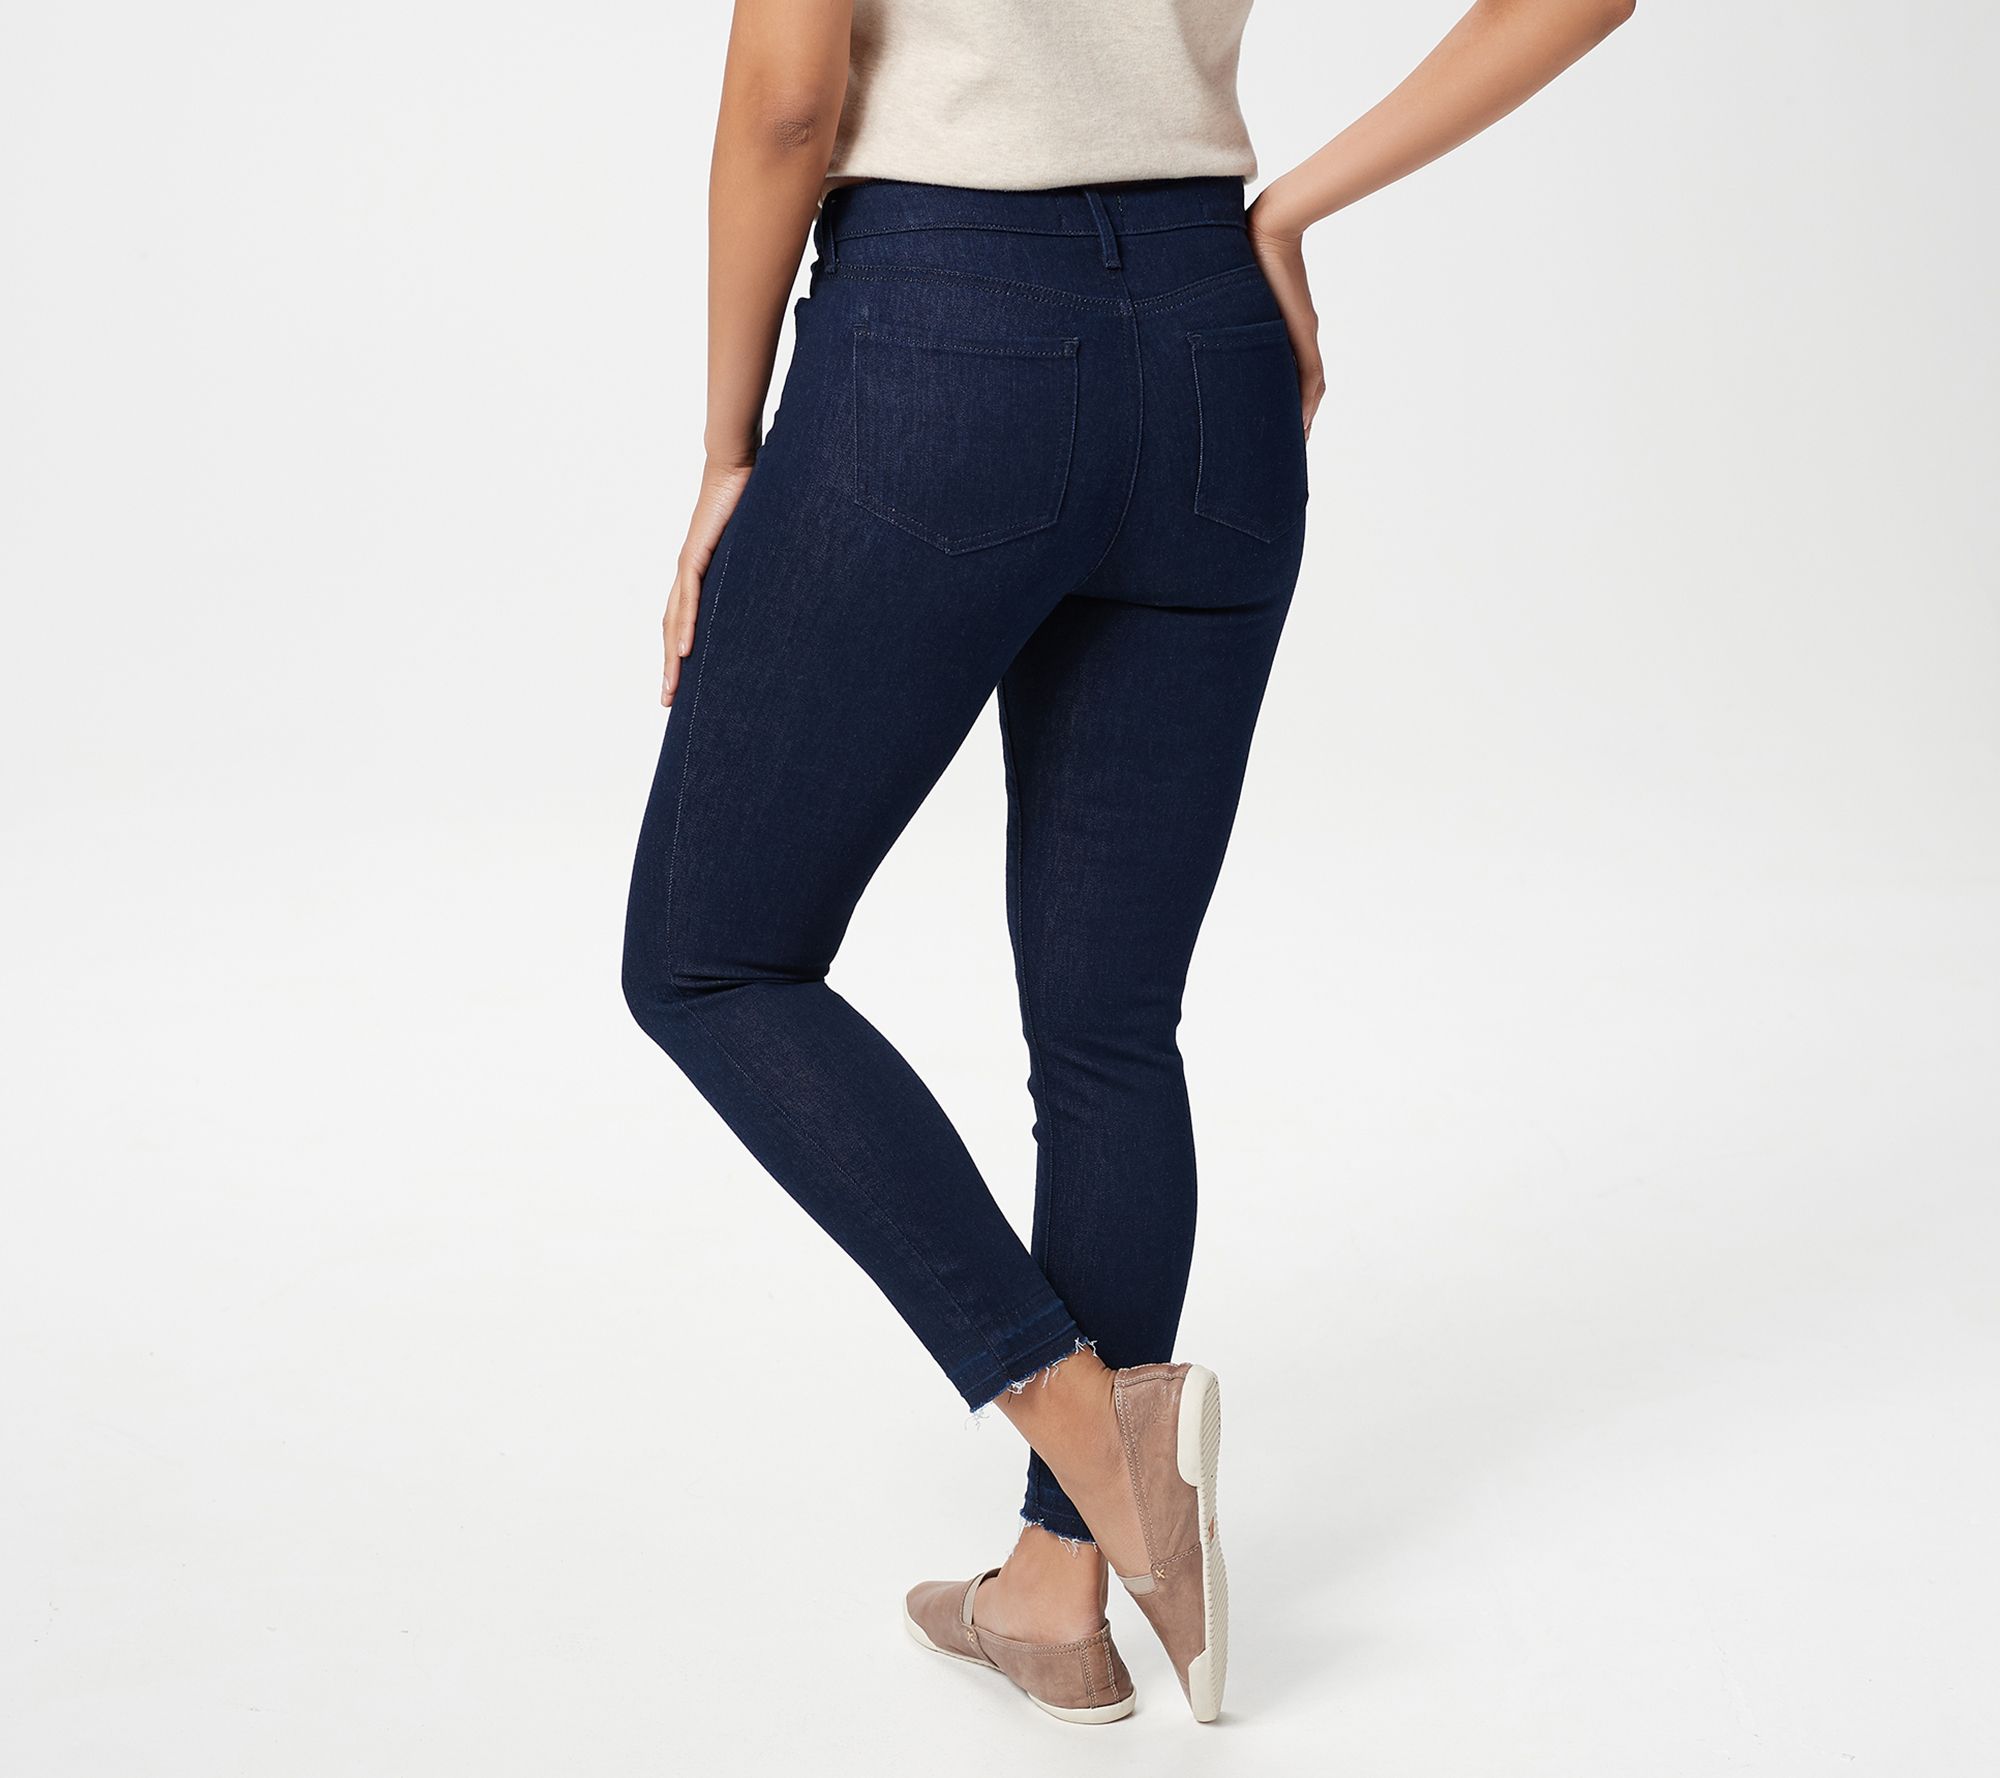 NYDJ Ami Skinny Ankle Jeans with Released Hem - Rinse - QVC.com